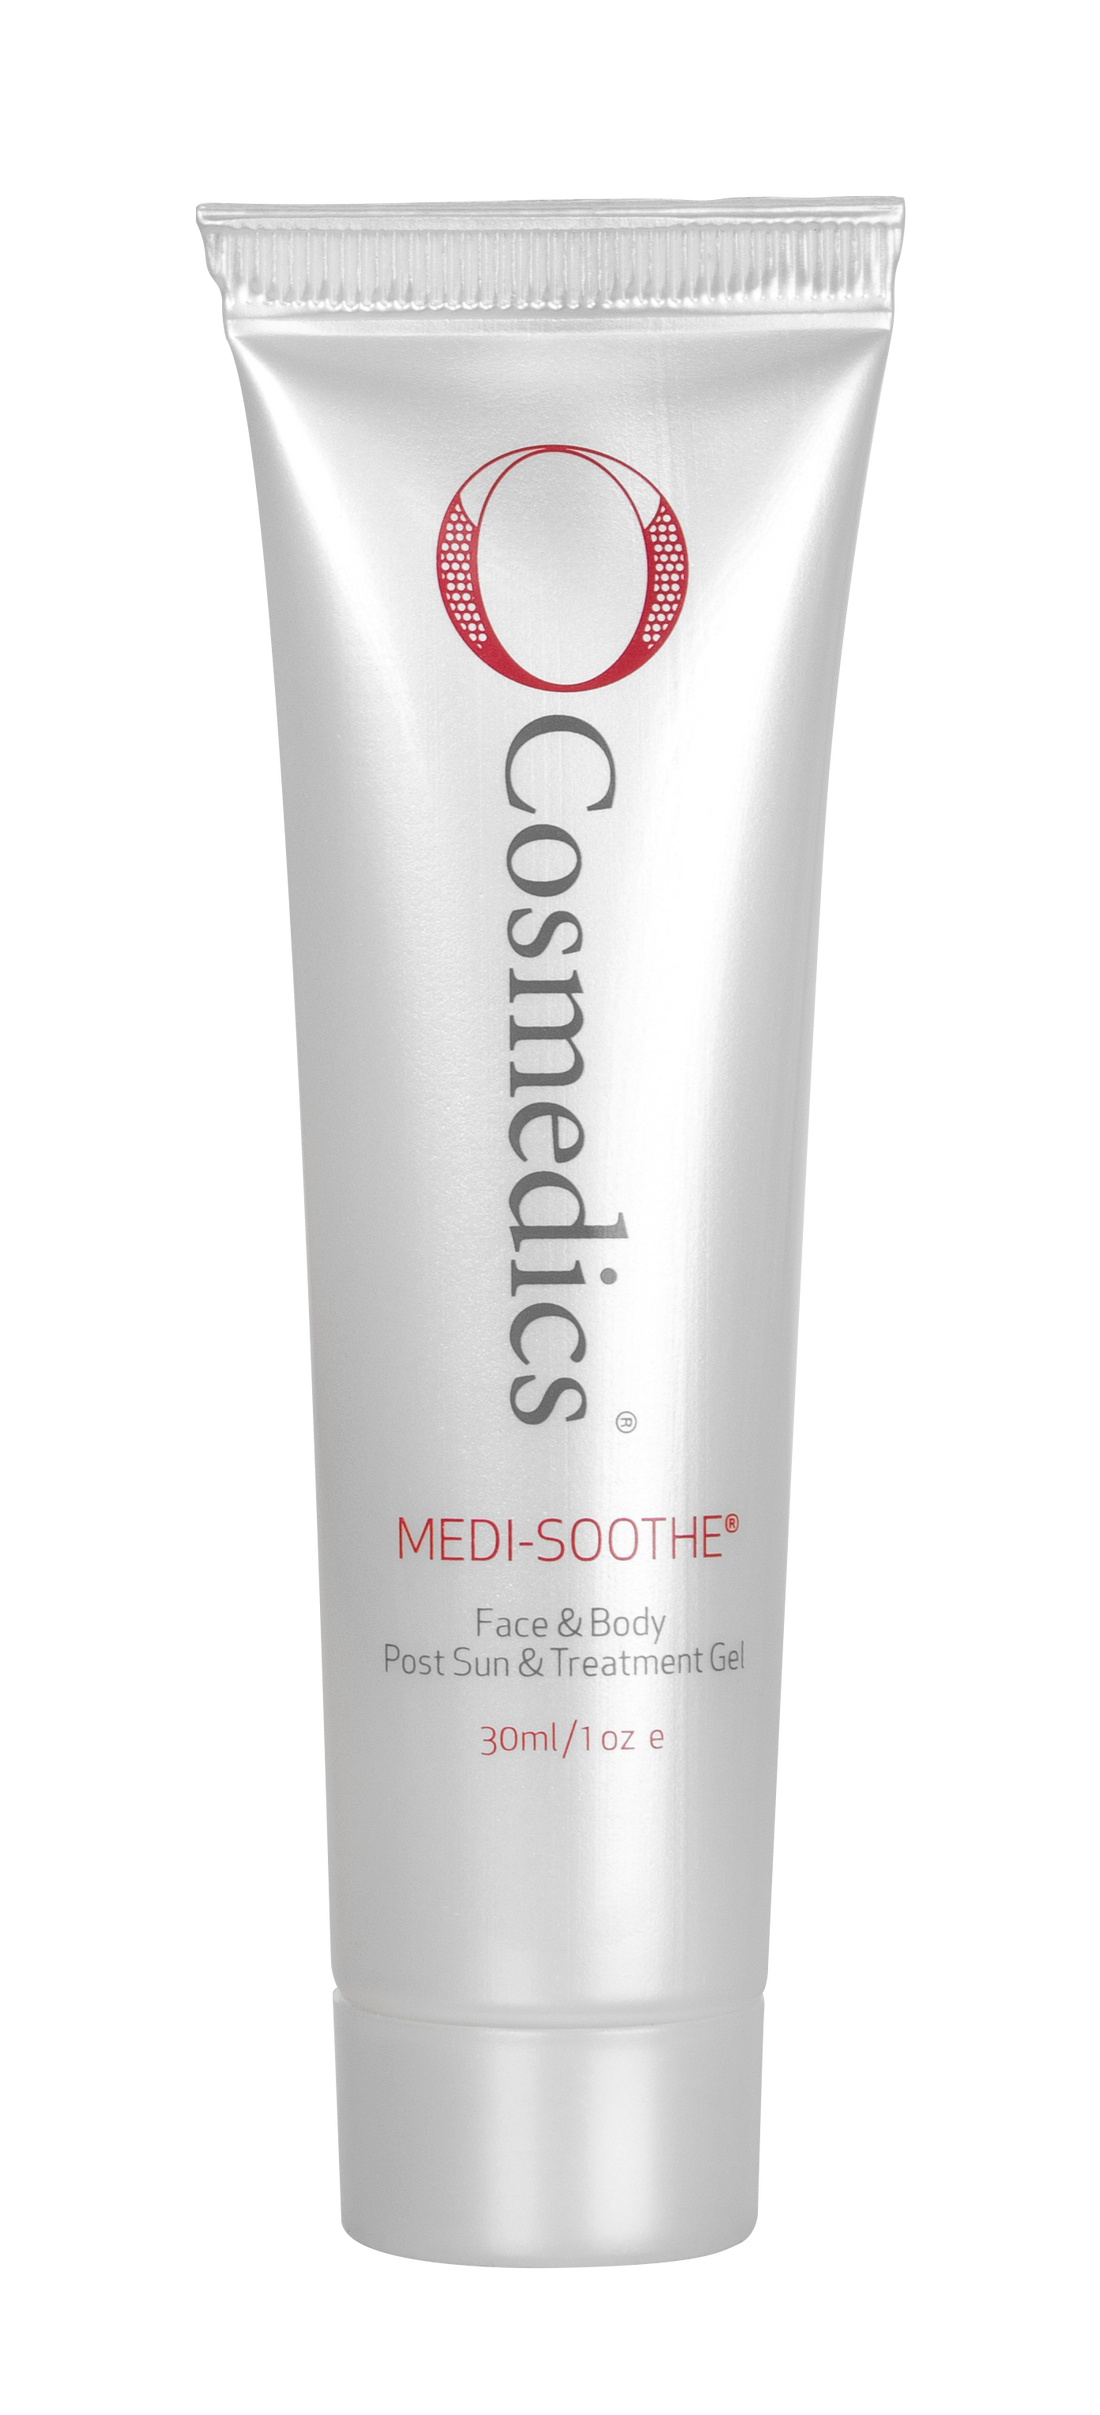 Medi-Soothe Travel Size 30ml